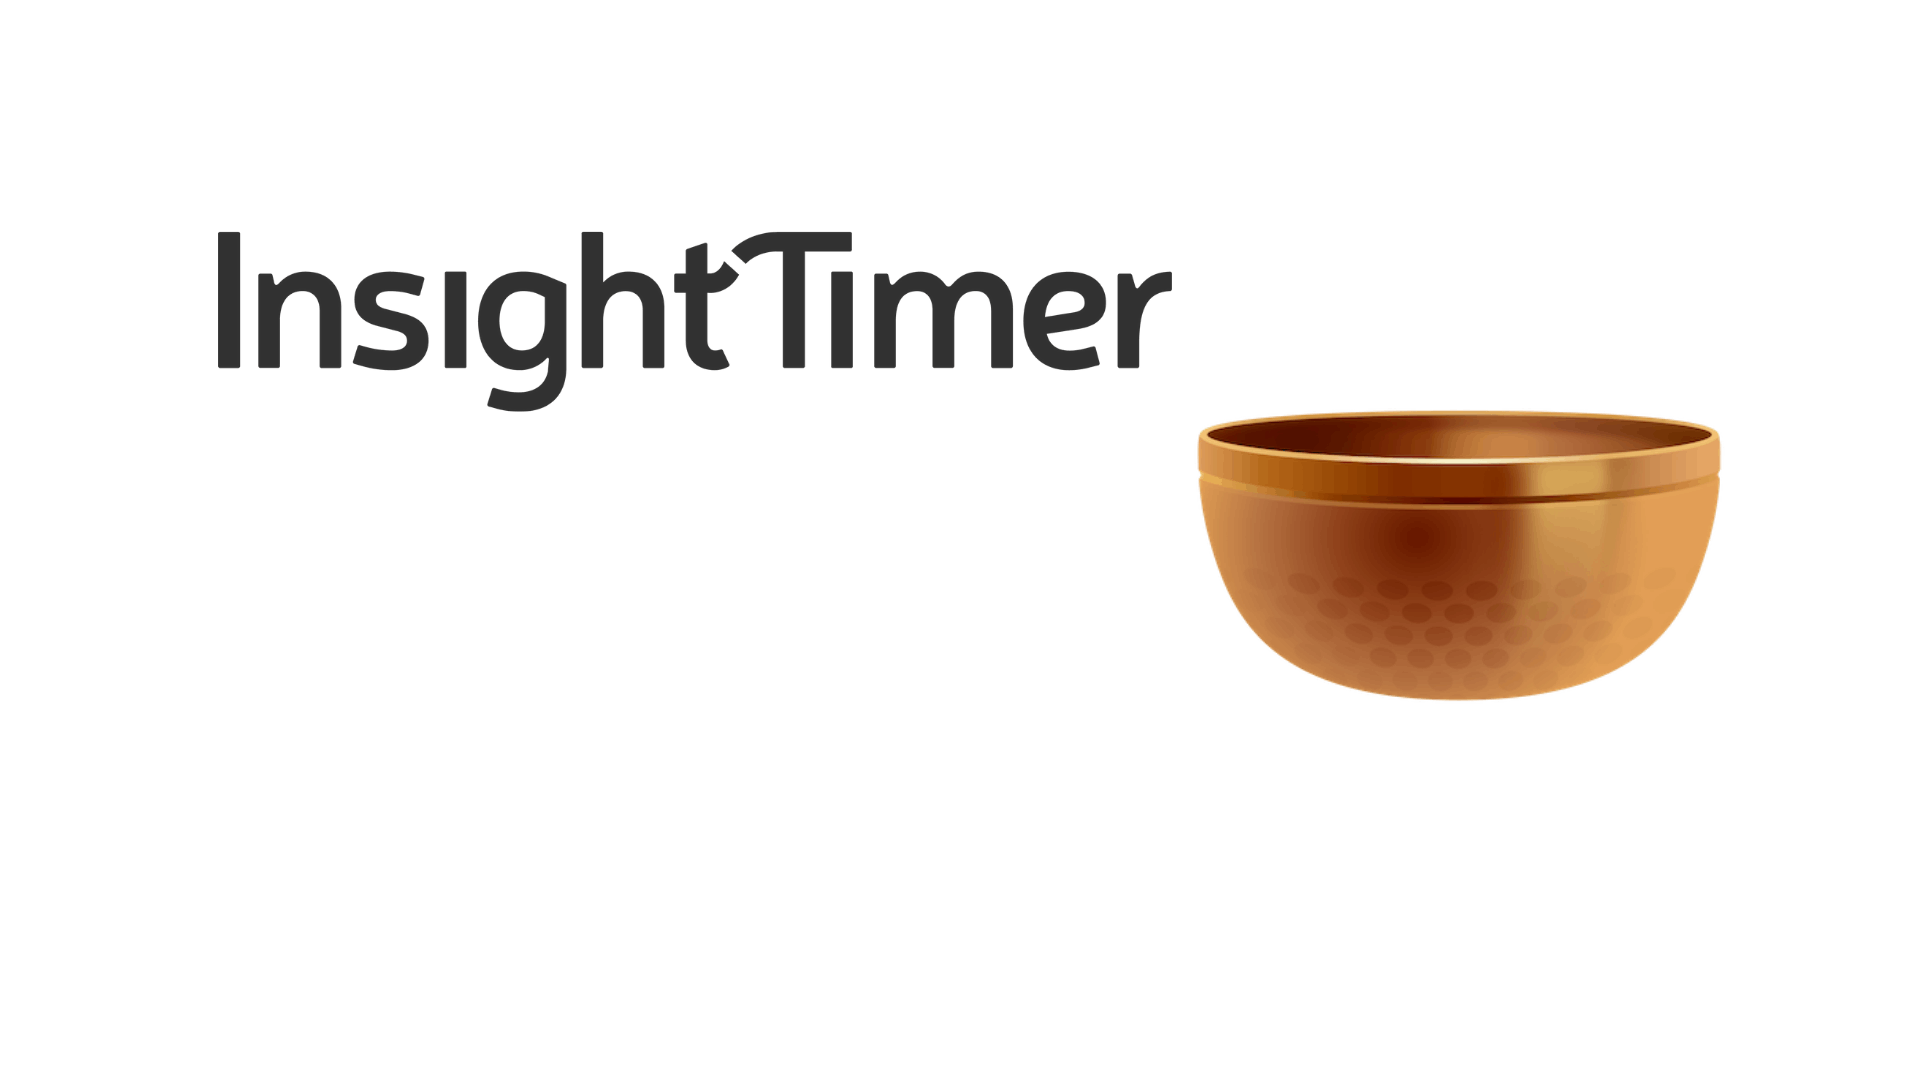 Insight Timer App - Learn How to Use